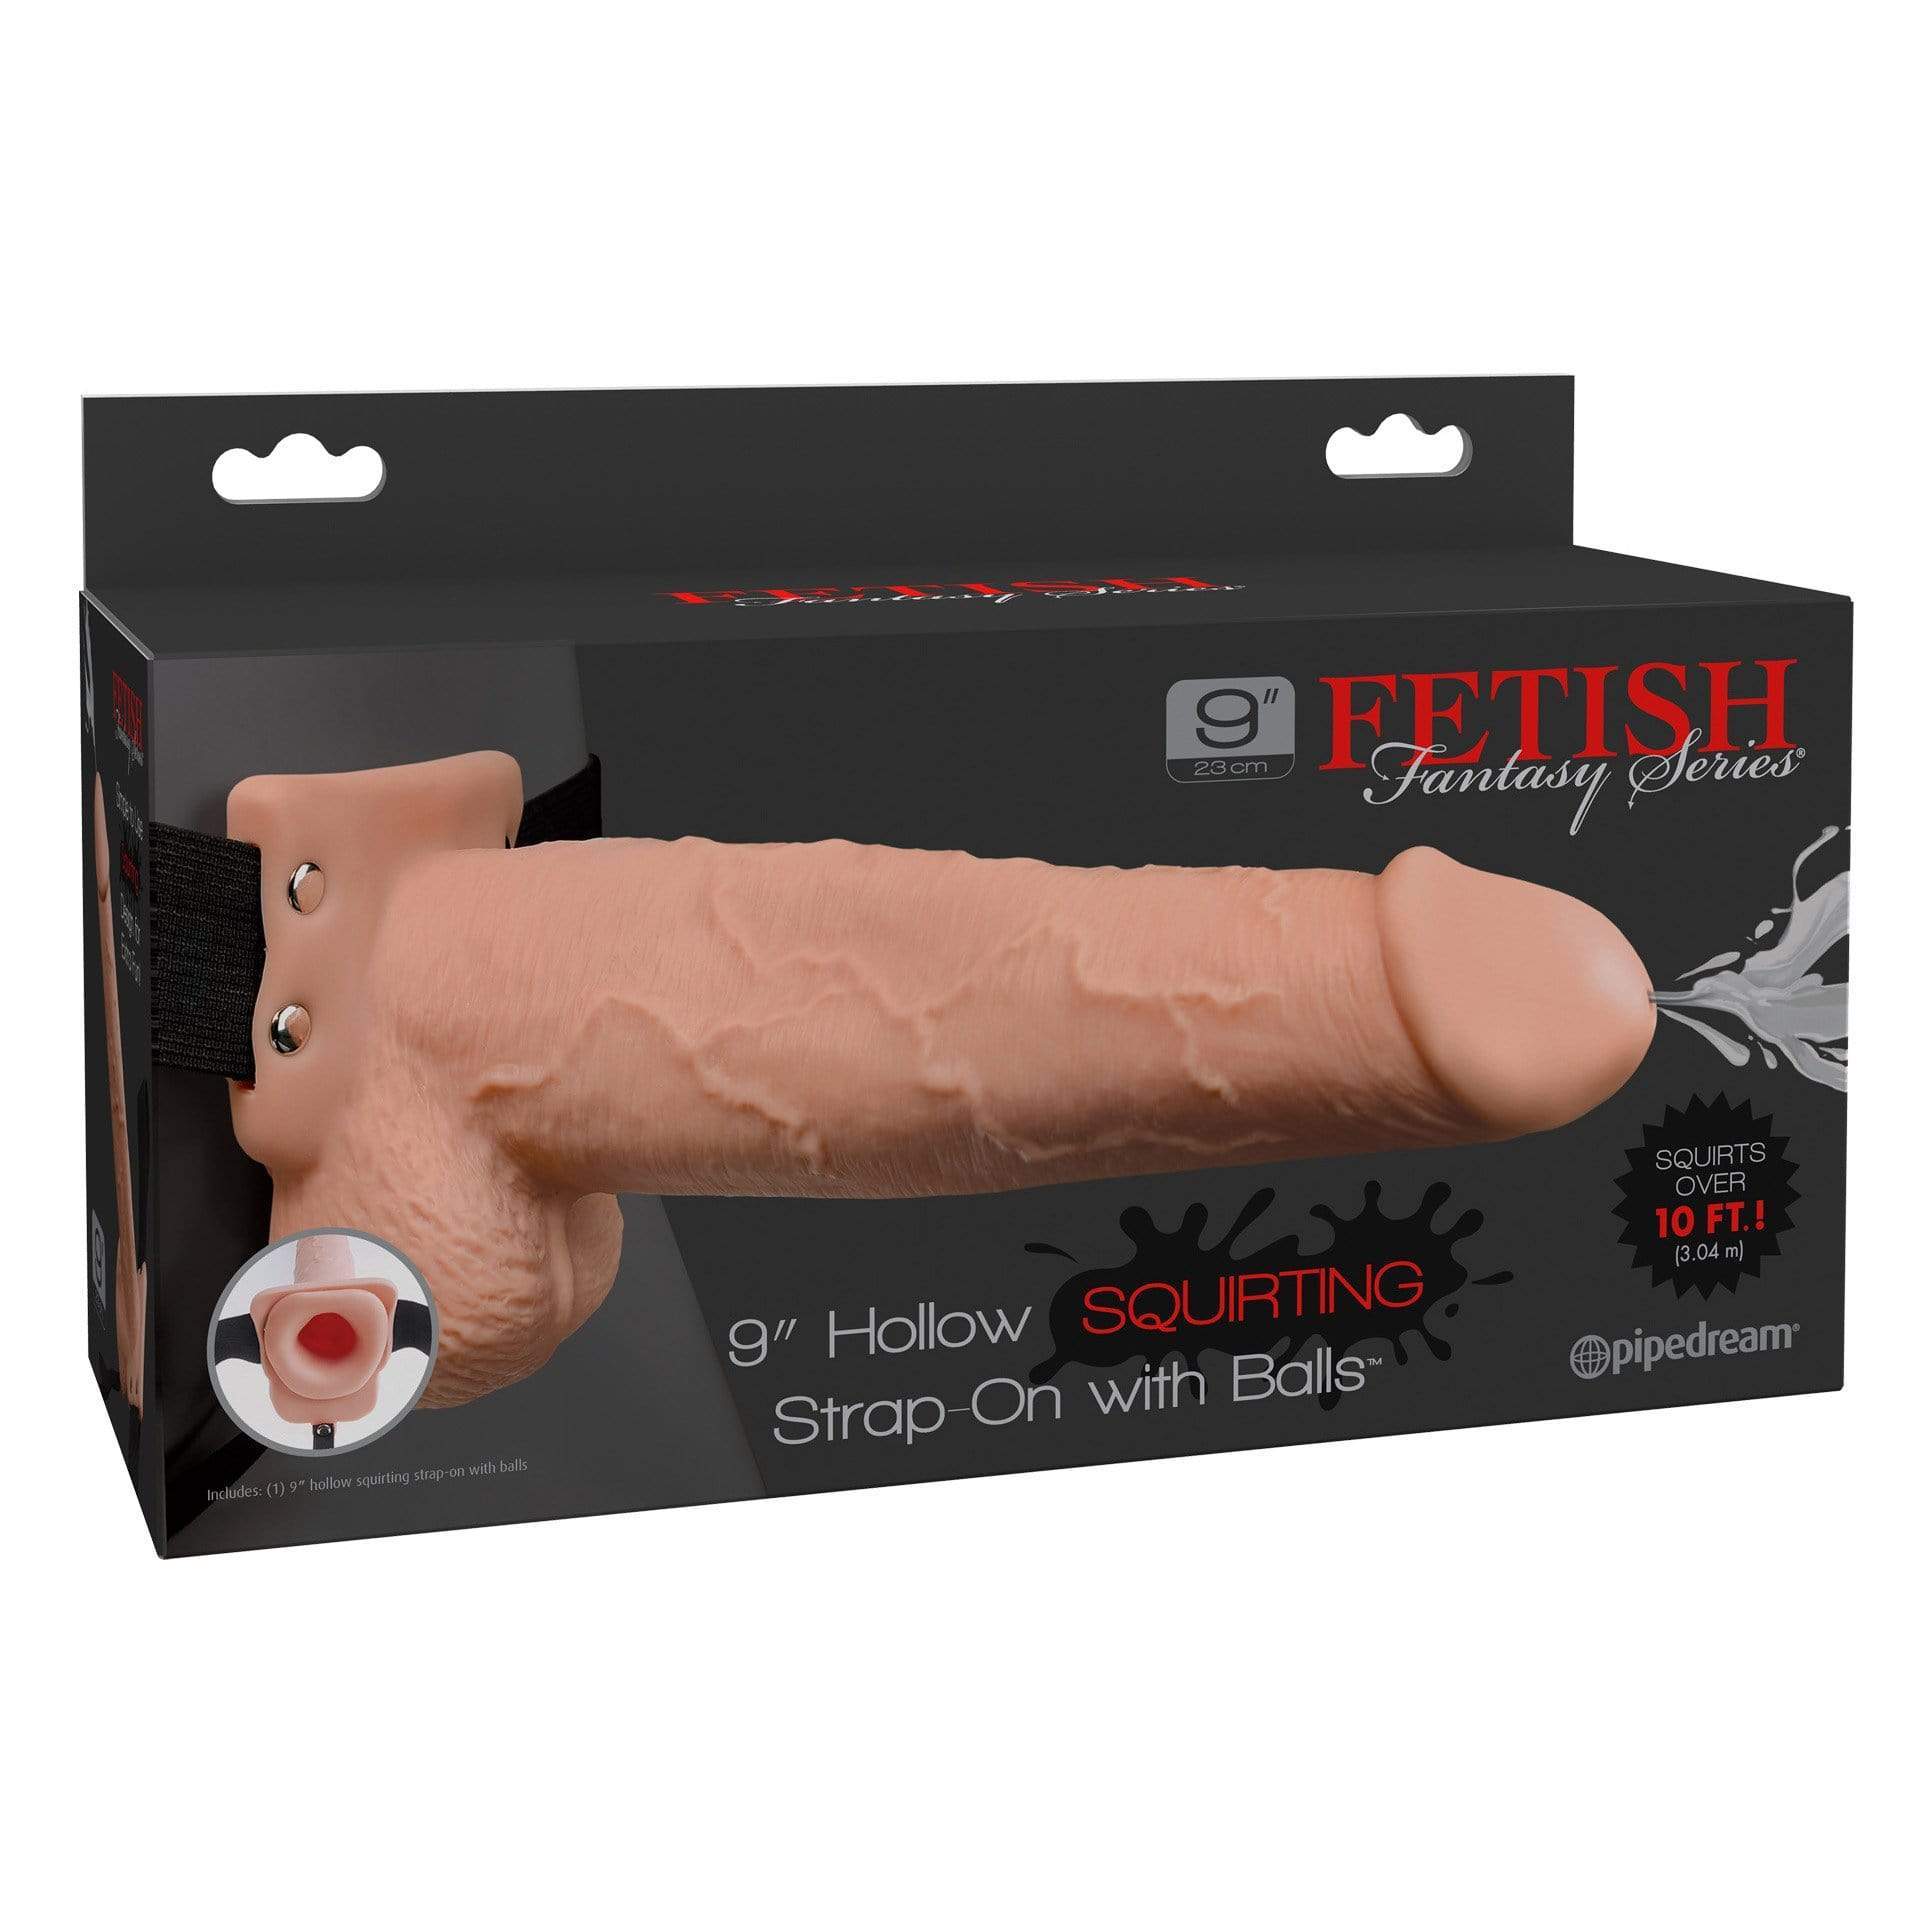 Pipedream - Fetish Fantasy Series Squirting Hollow Strap On 9" (Beige) -  Strap On with Hollow Dildo for Male (Non Vibration)  Durio.sg